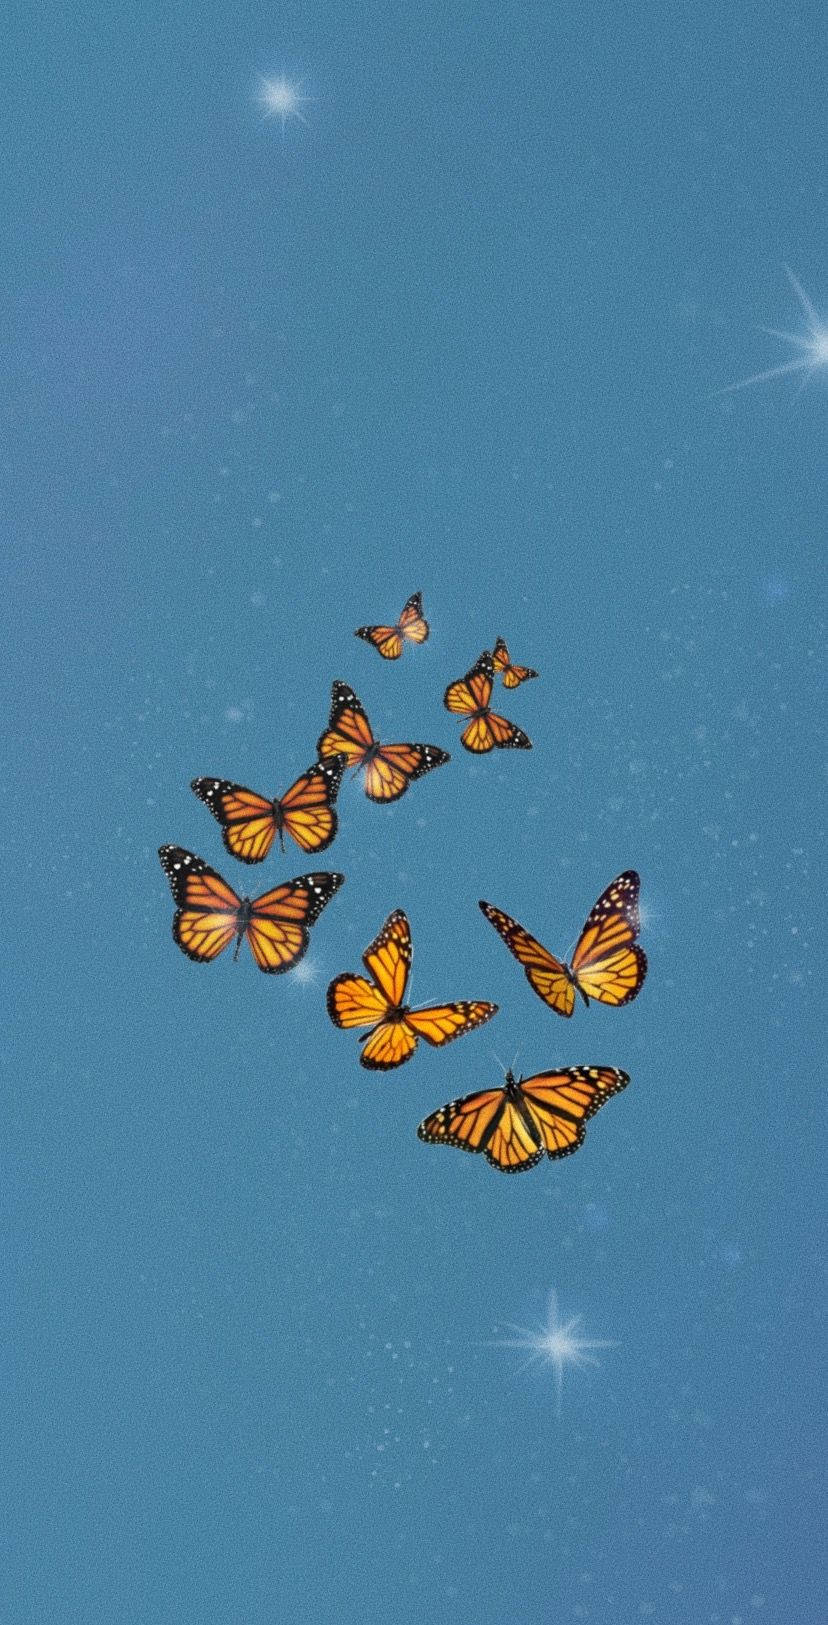 Butterfly Aesthetic Group Of Monarch